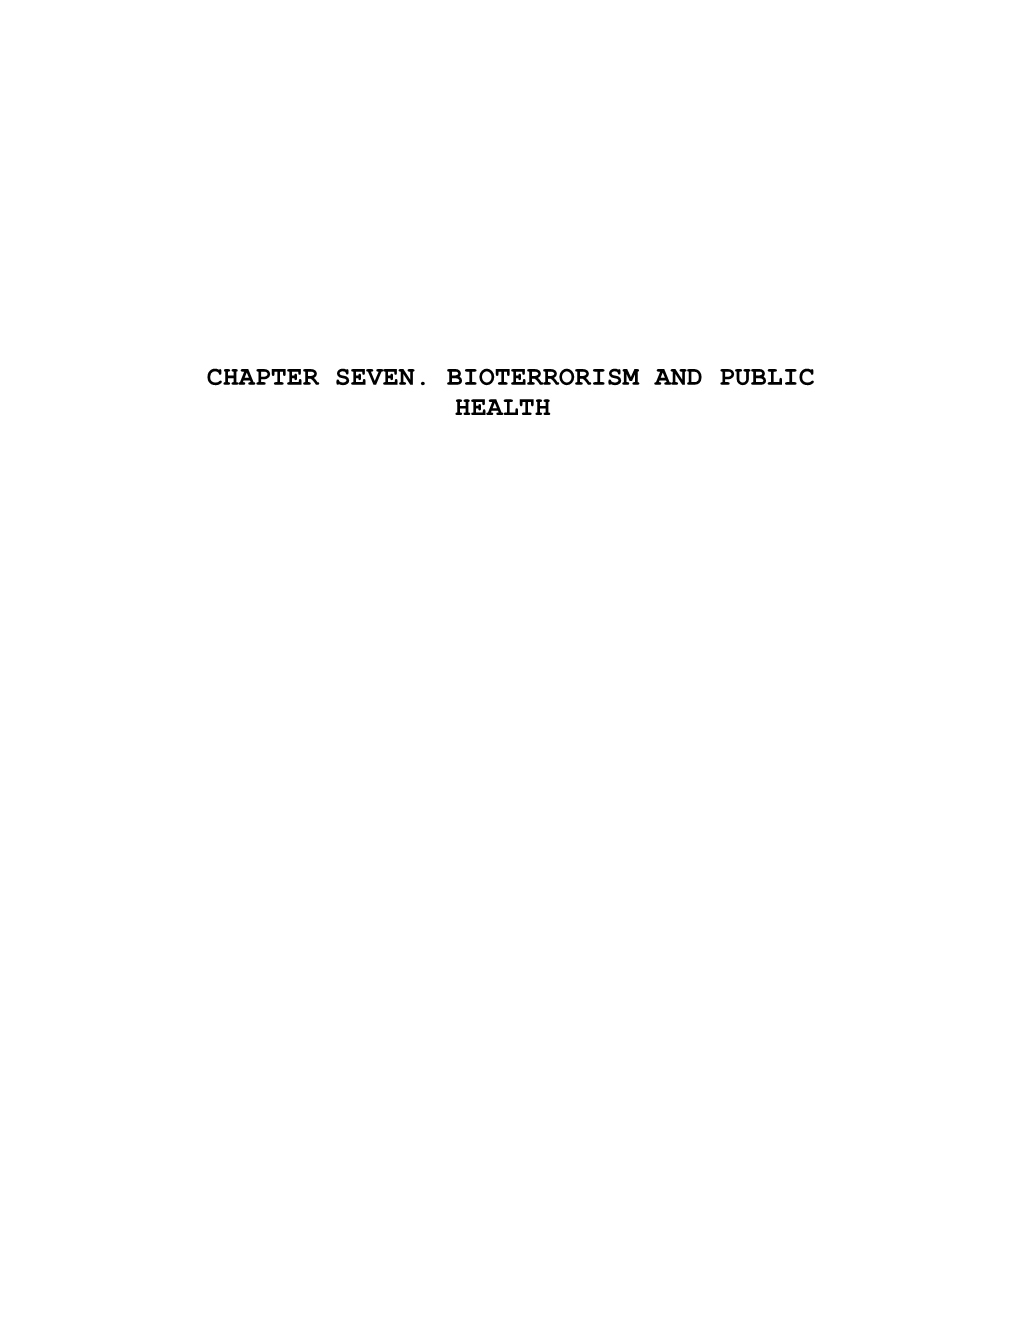 Chapter Seven. Bioterrorism and Public Health